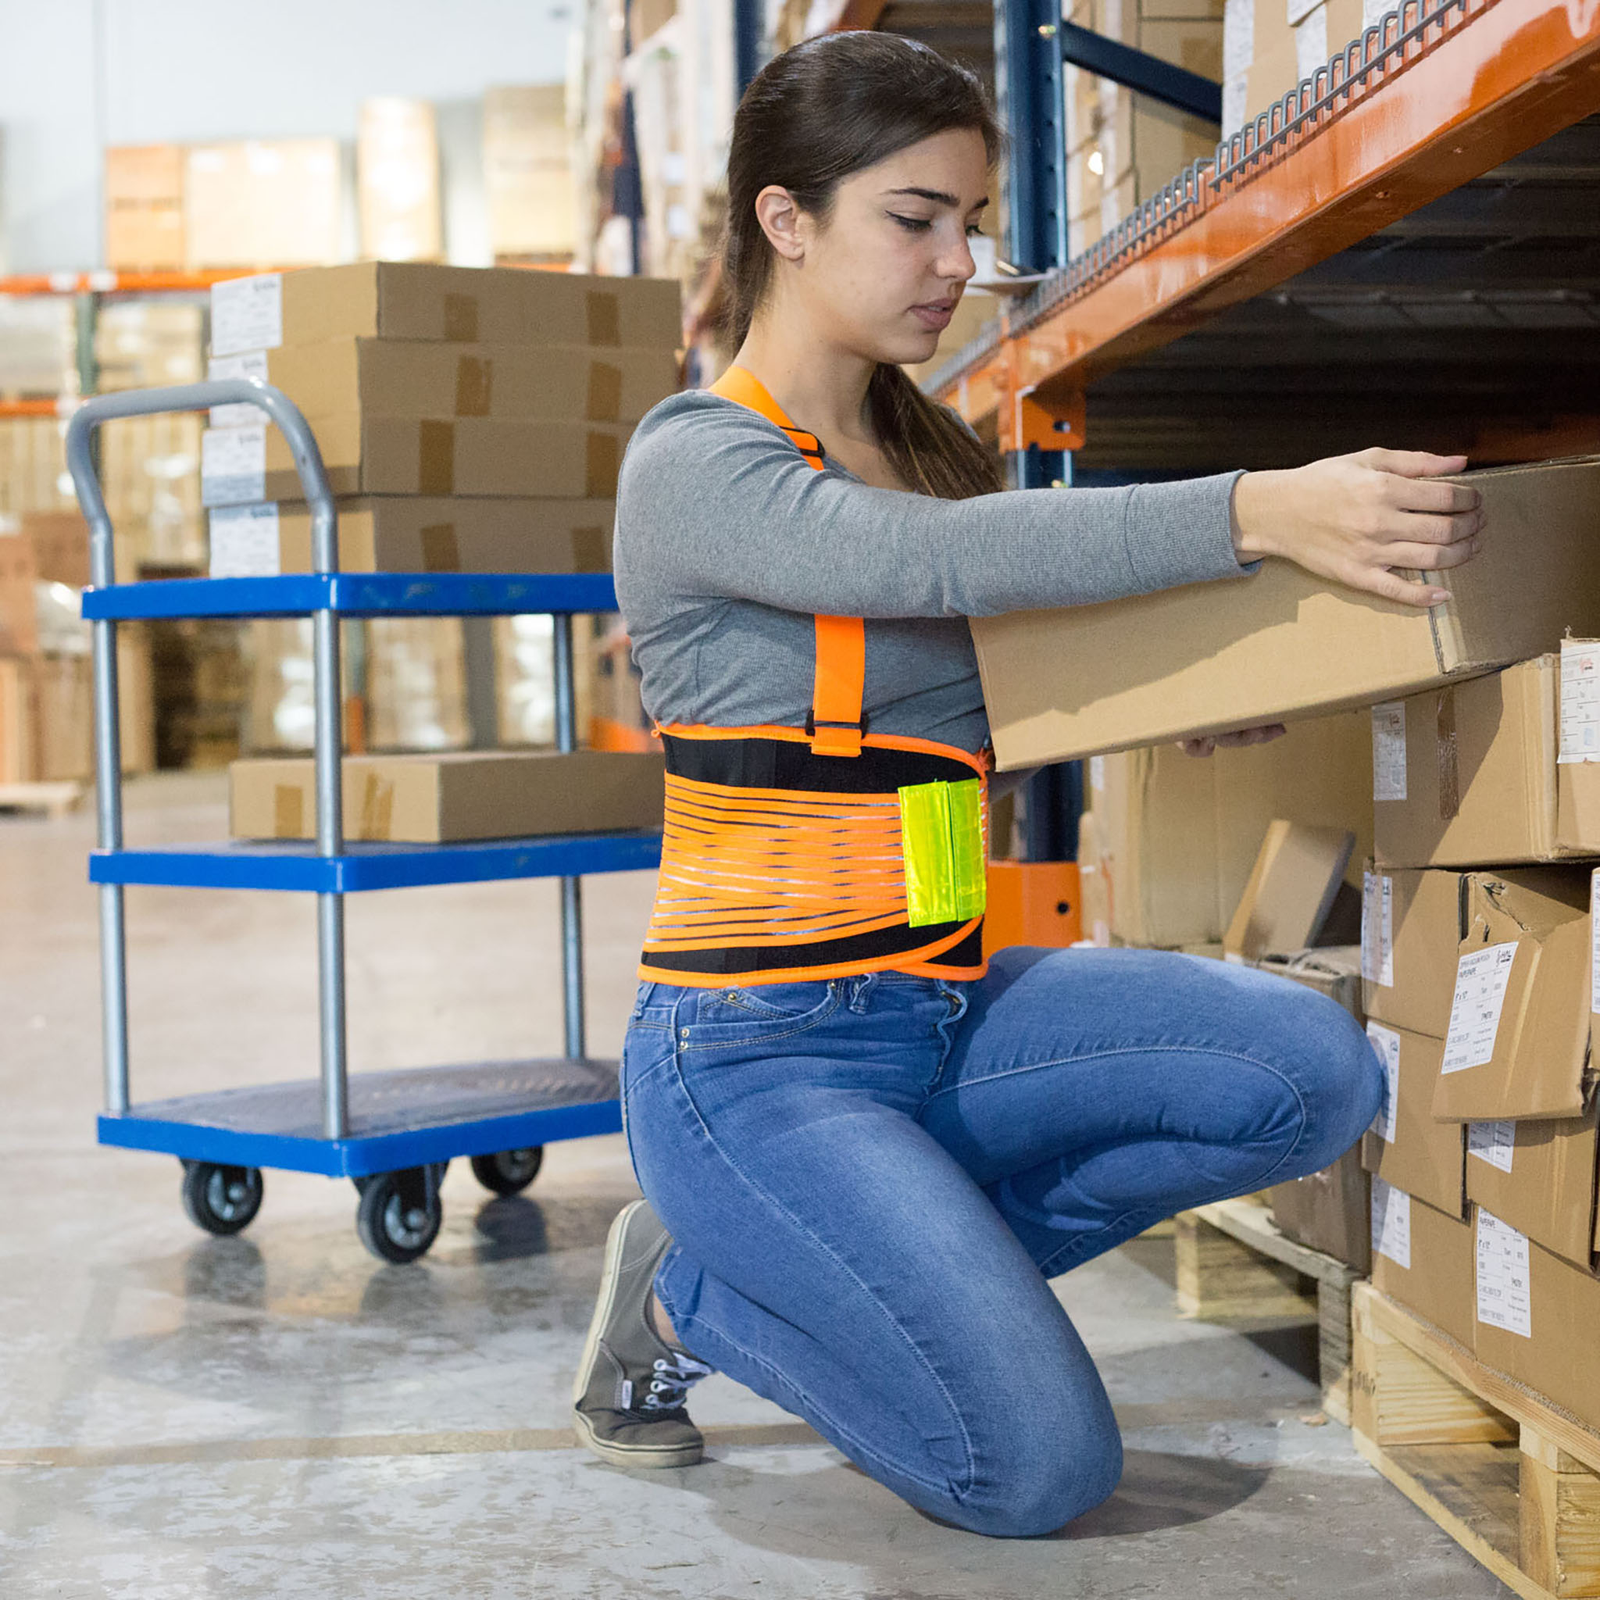 A lady wearing a high visibility adjustable back support belt to avoid back injuries while carrying a heavy box in a warehouse